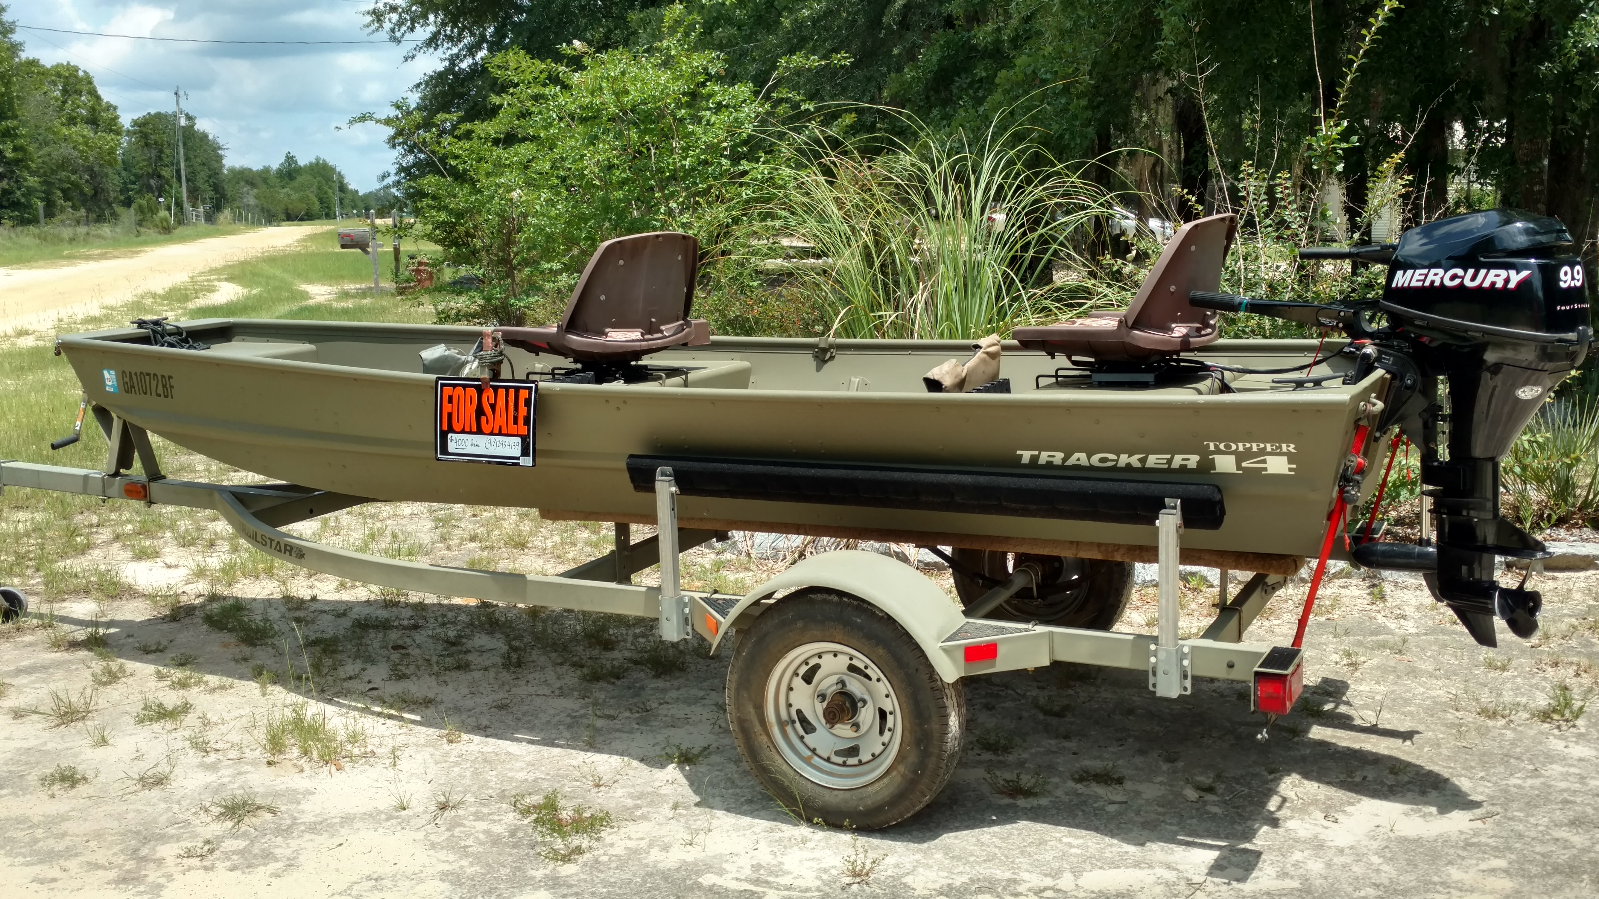 Tracker Topper 2013 for sale for $3,000.